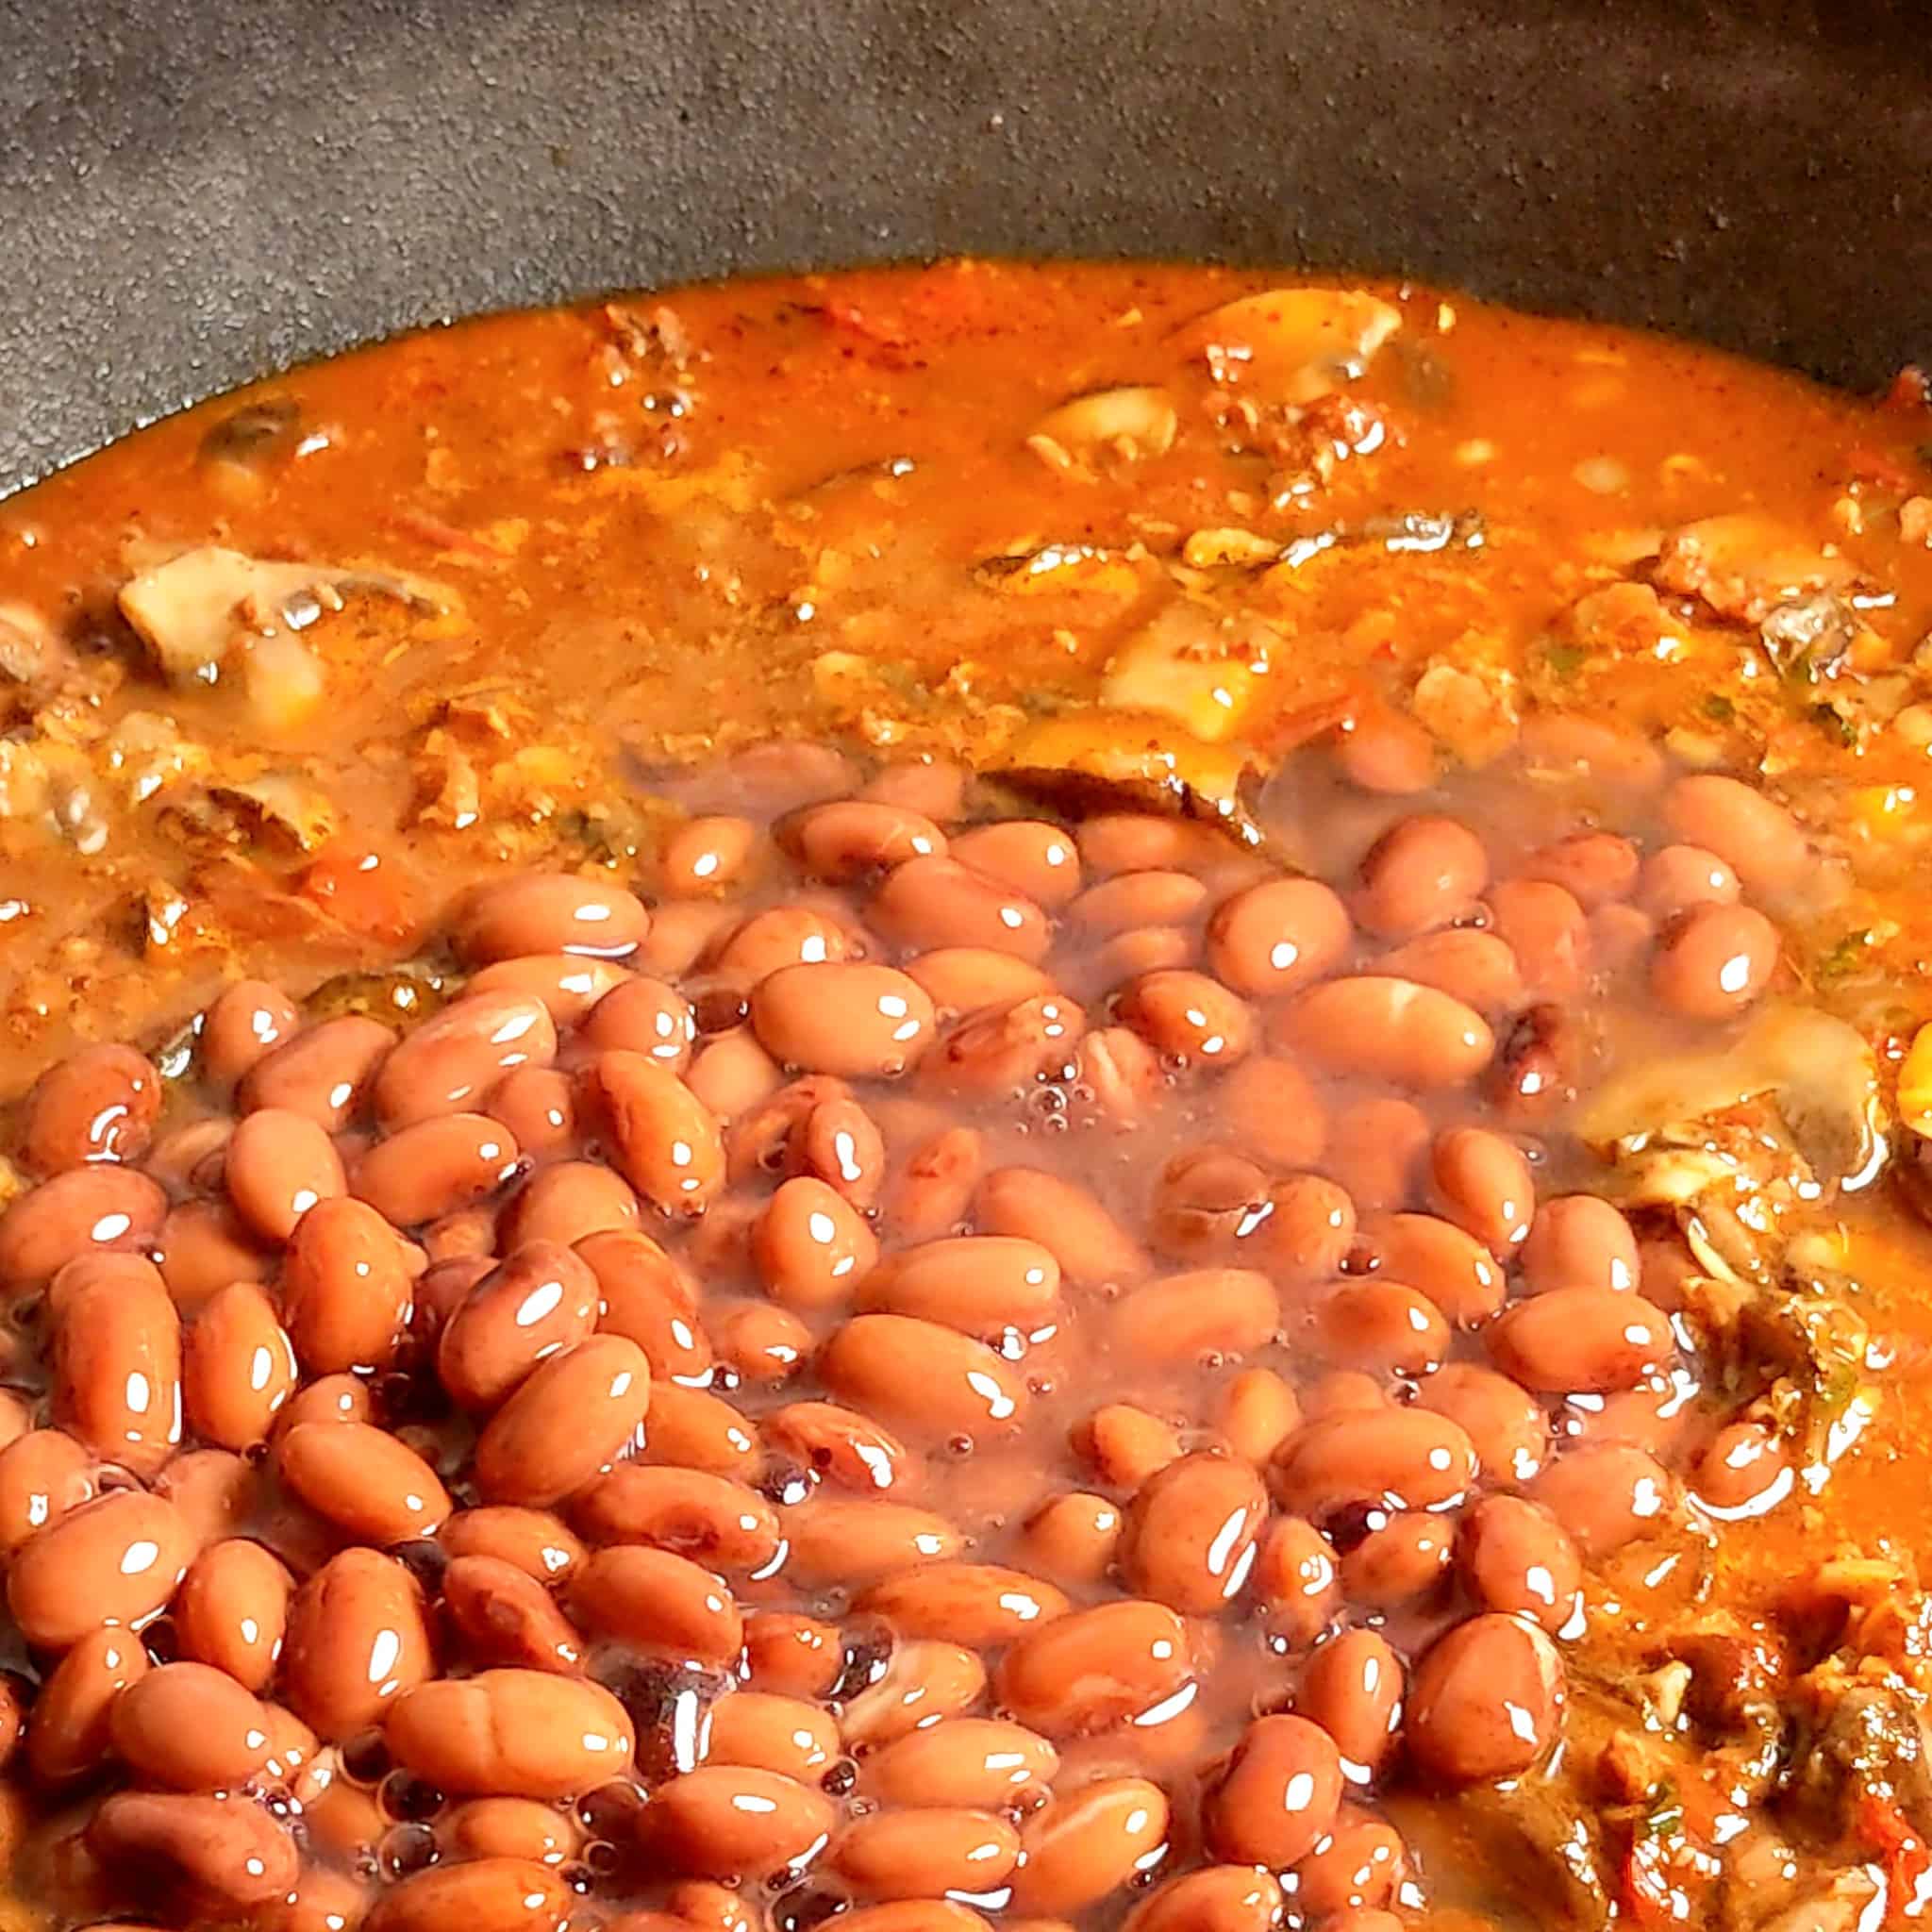 pinto beans added to the mushrooms and vegetables simmering in vegetable broth for the mushroom lentil bean chili